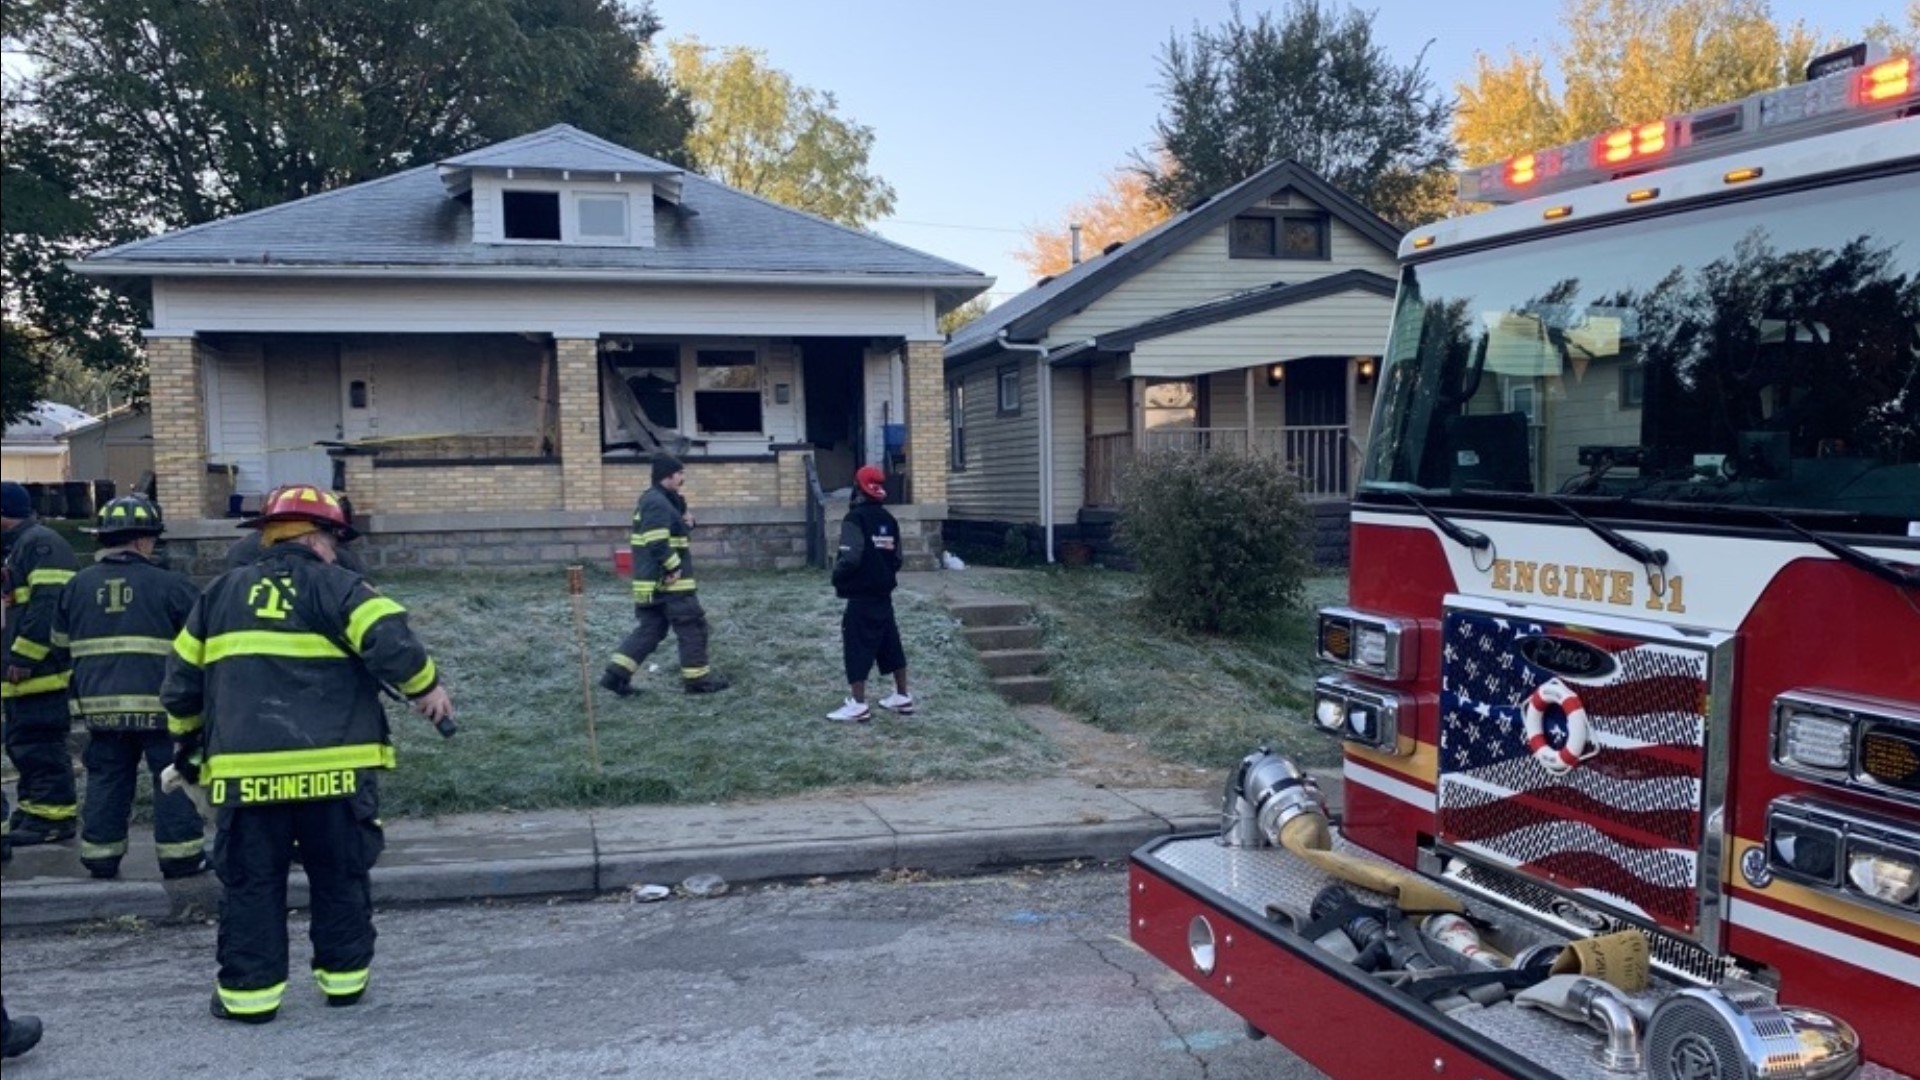 Firefighters discovered a body inside a burning house on East Vermont Street Friday morning. Police are investigating the discovery as a possible homicide.